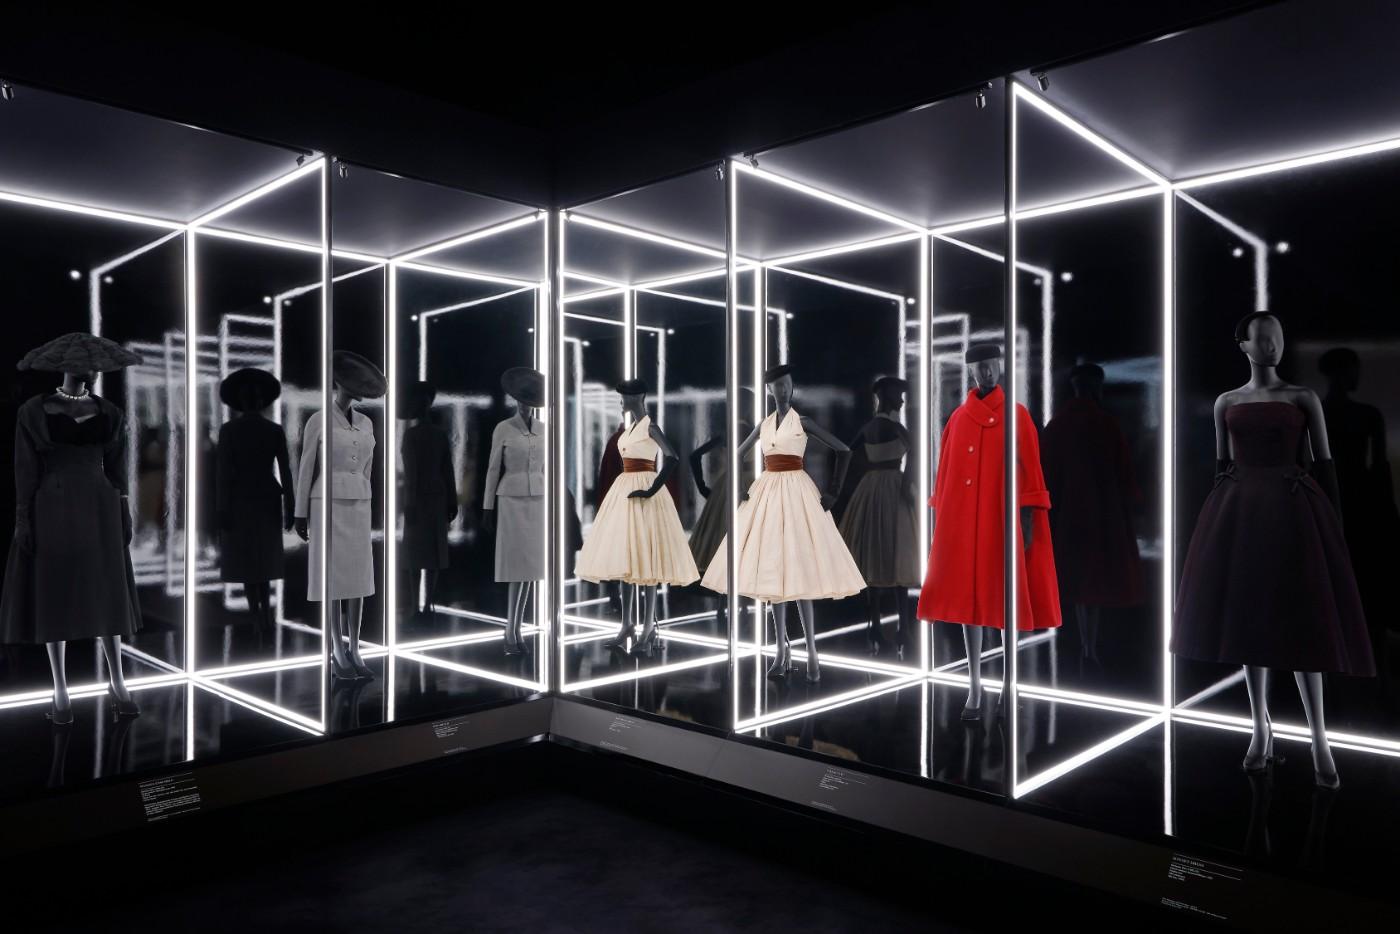 The V&A's Christian Dior Designer of Dreams exhibition, The Dior Line section